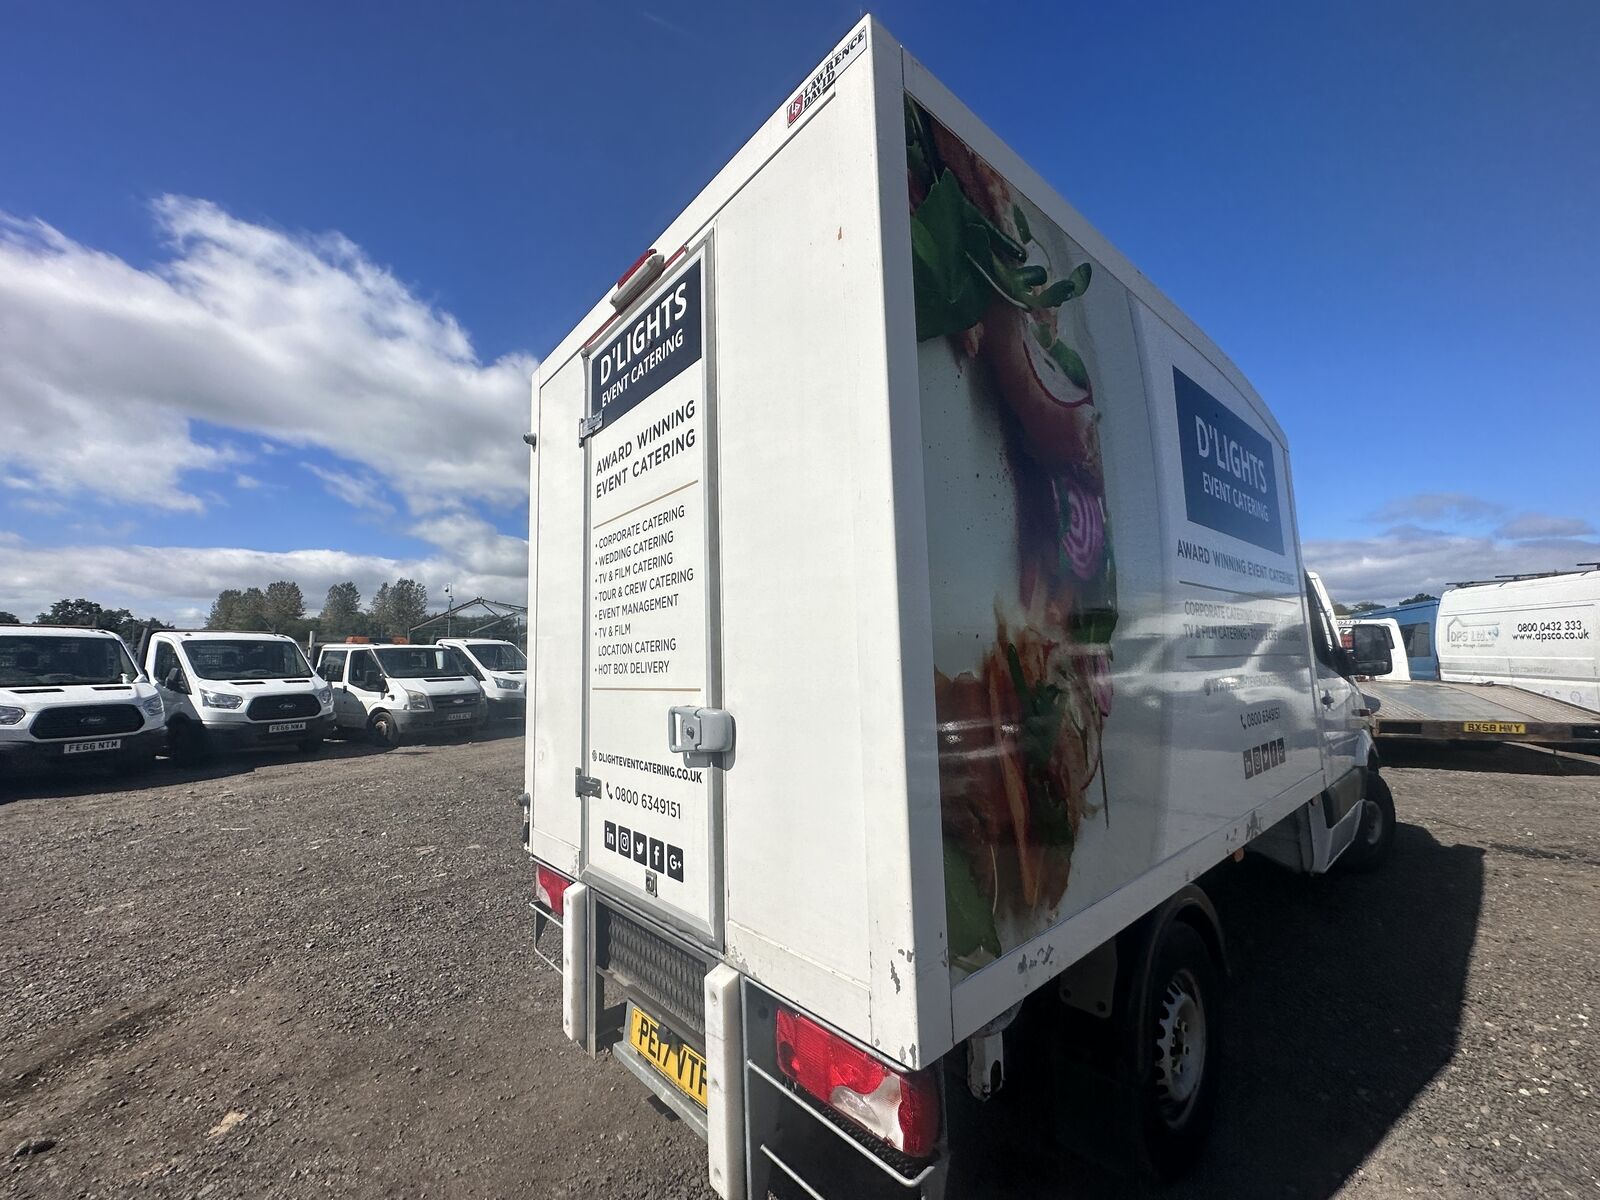 Bid on COLD CARGO KING: 2017 MERCEDES-BENZ SPRINTER 314CDI - DELIVERING FRESHNESS WITH PRECISION- Buy &amp; Sell on Auction with EAMA Group